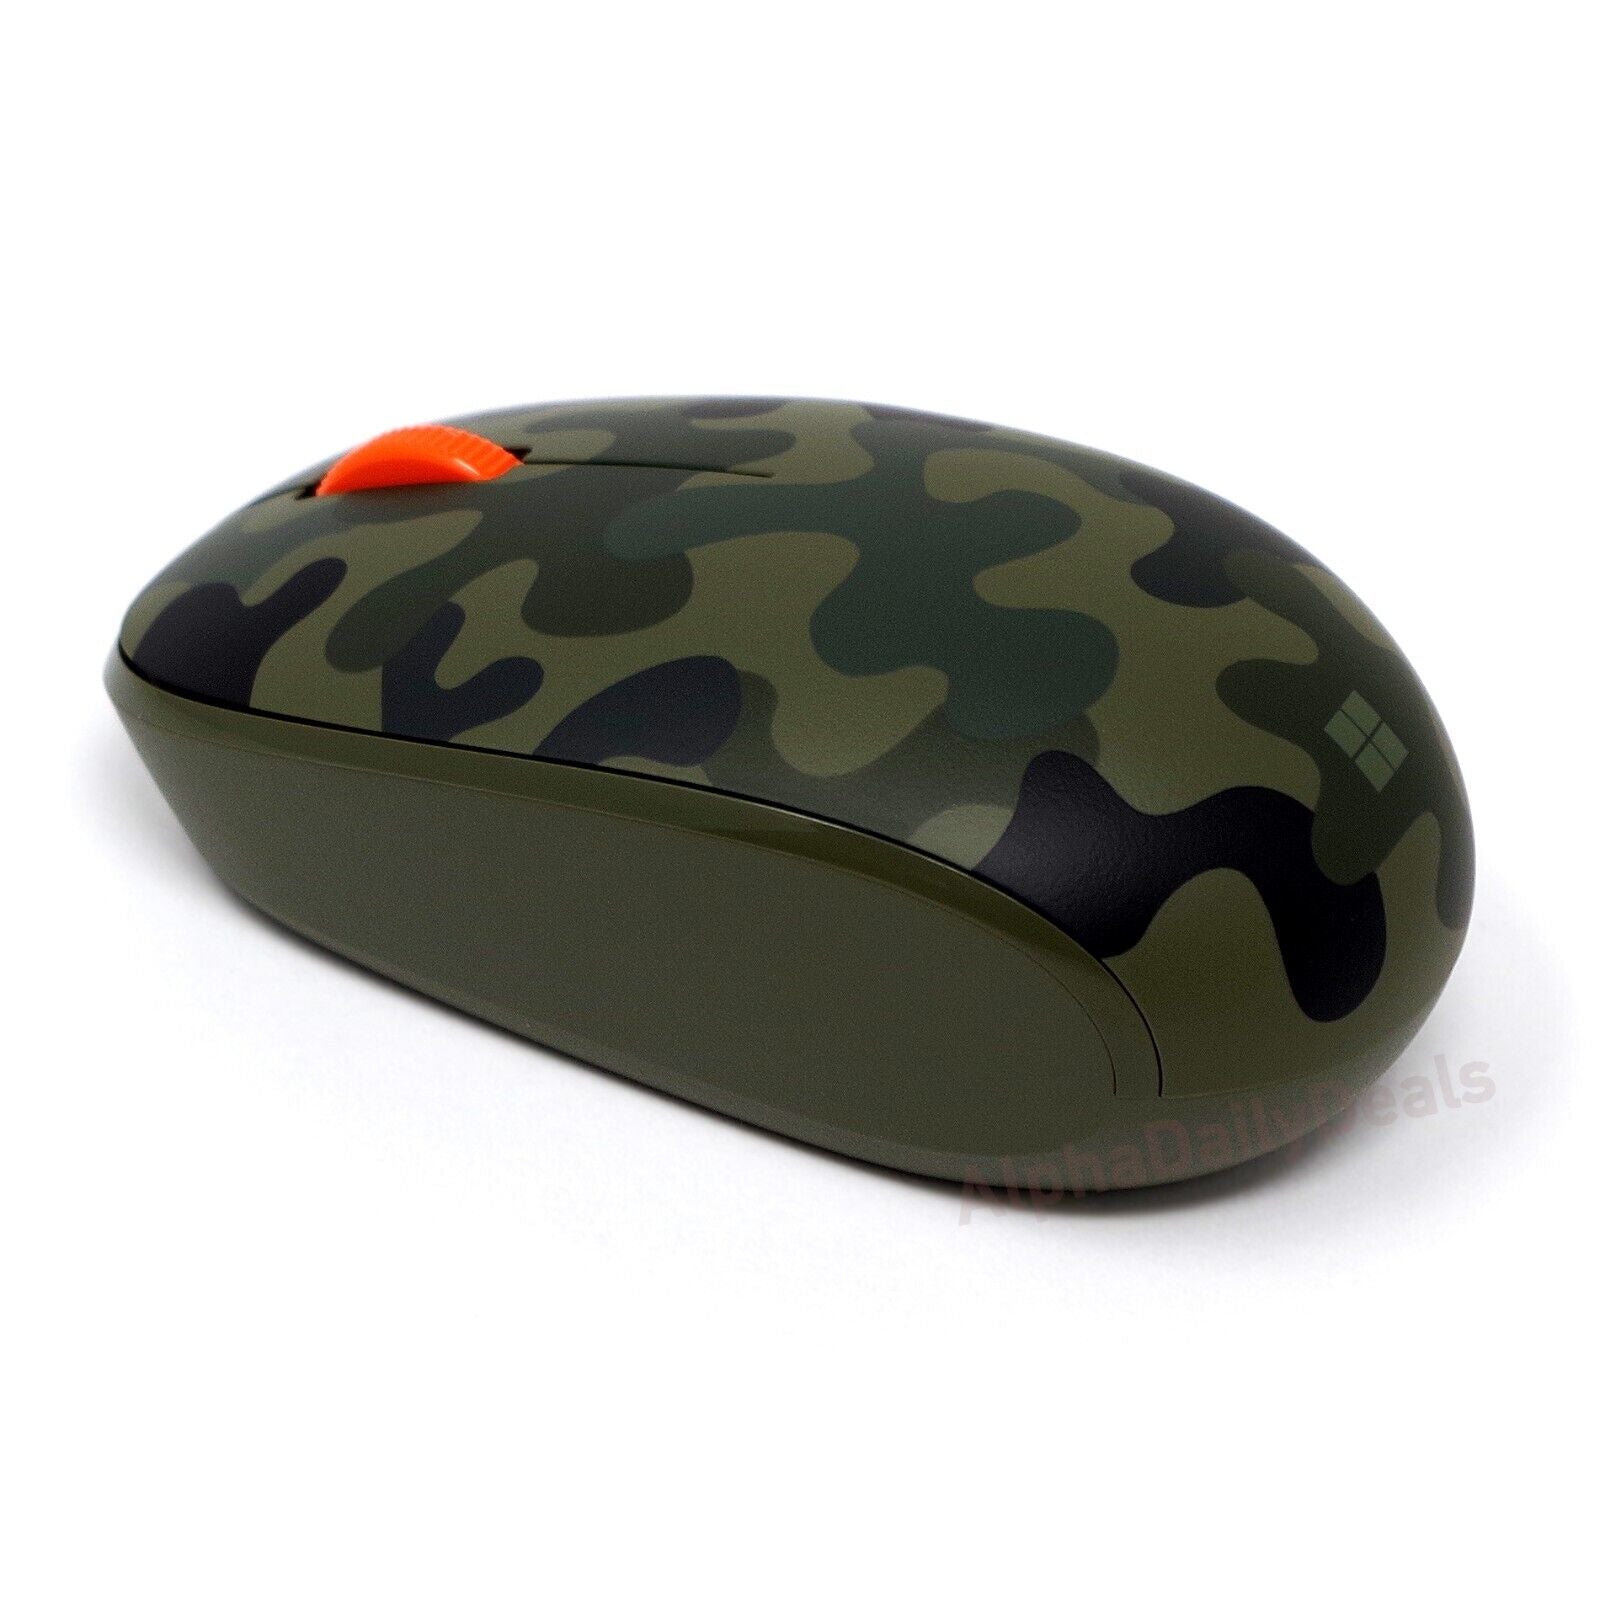 NEW Microsoft Wireless Bluetooth Optical Mouse Forest Camo Laptop PC Windows